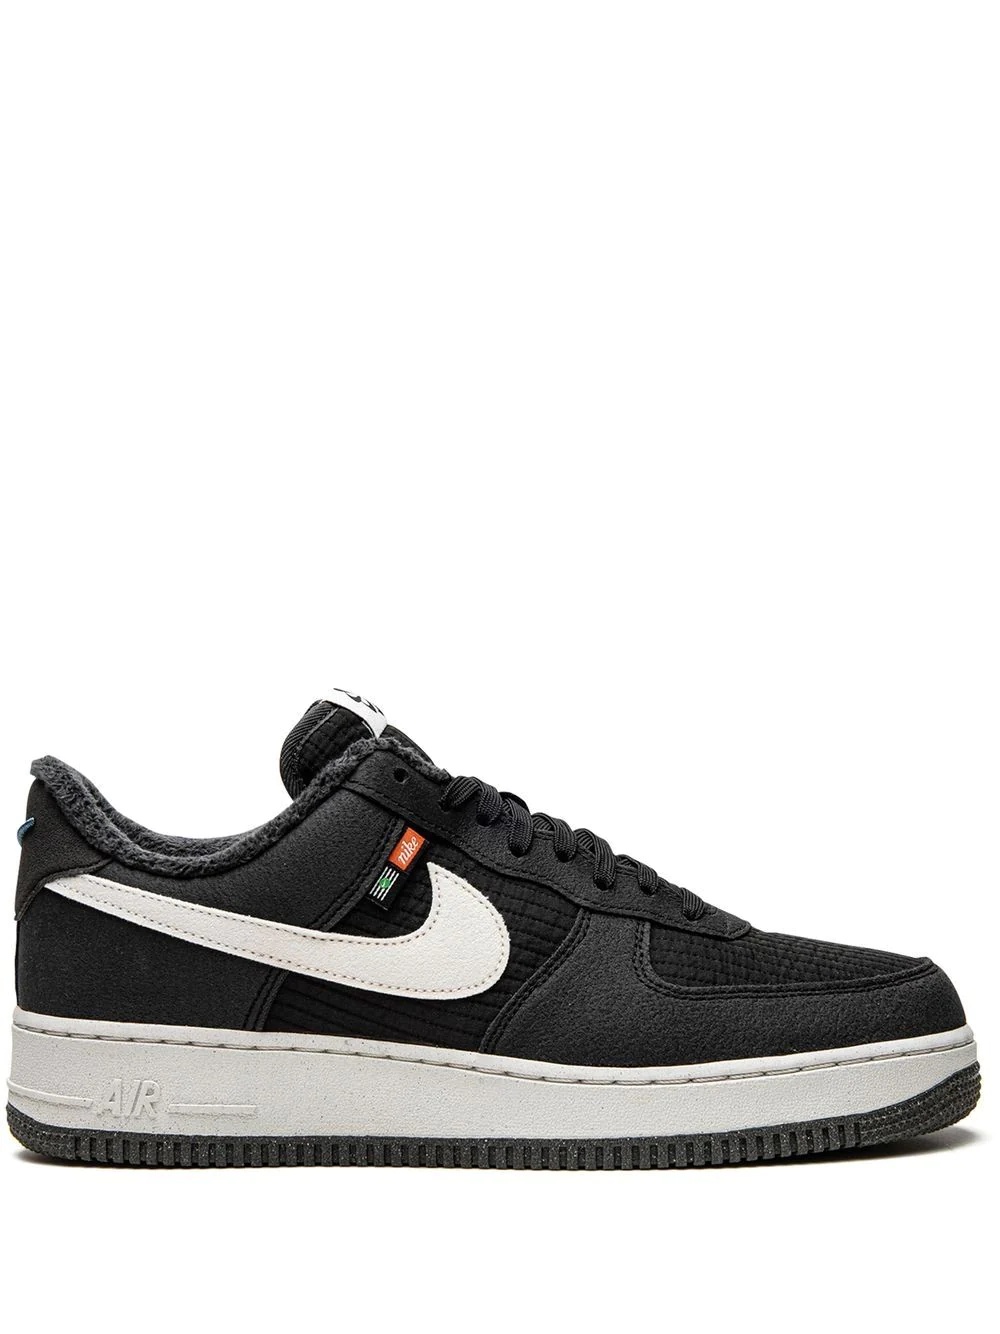 Air Force 1 '07 LV8 NN "Toasty Black/White" sneakers - 1